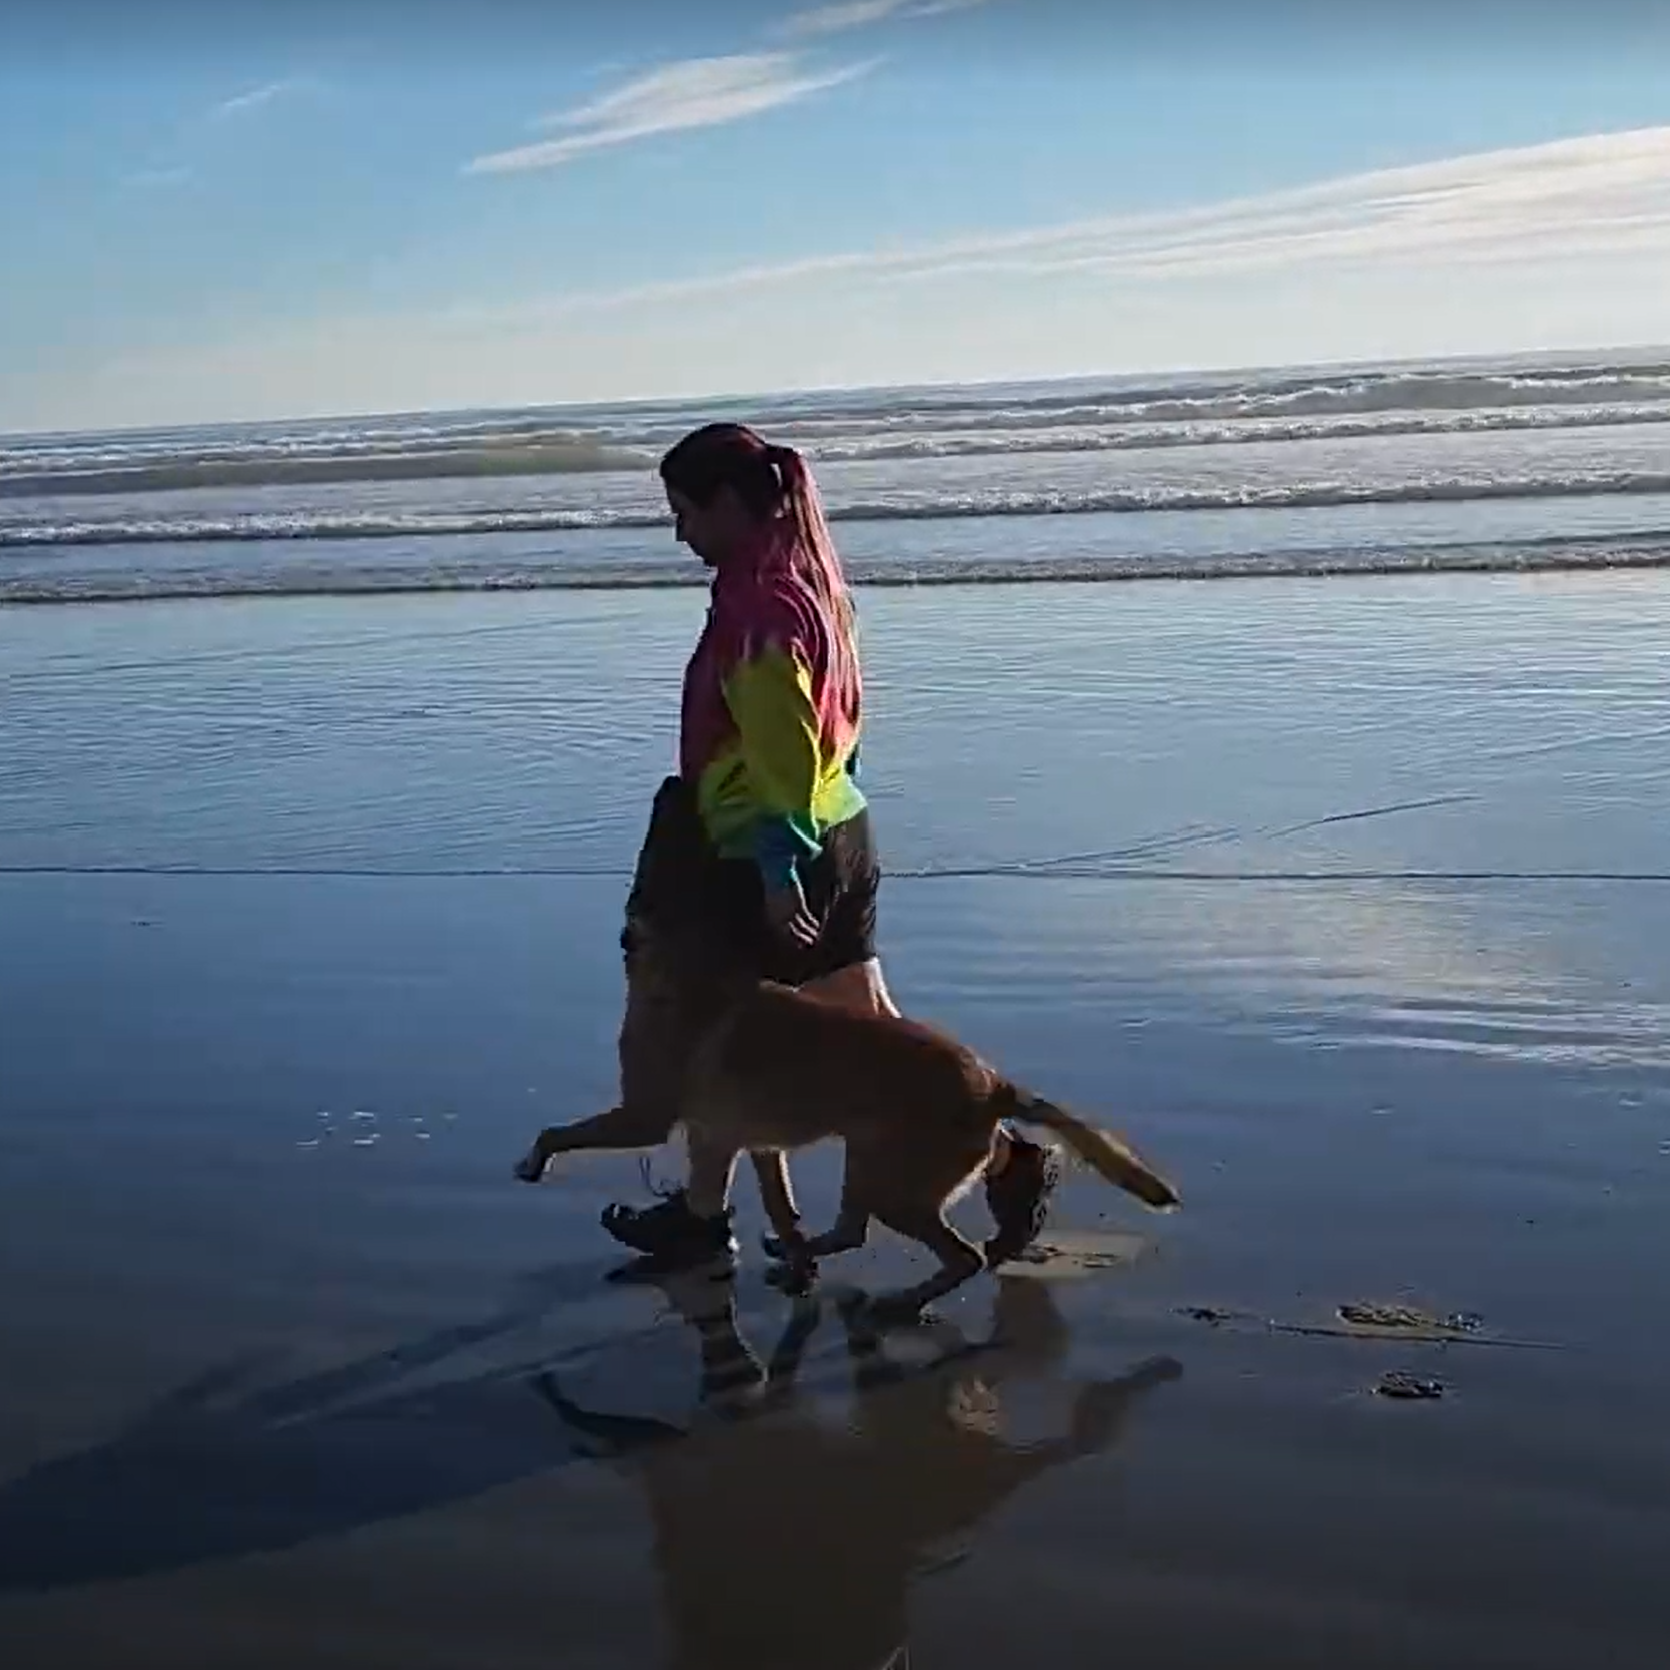 Service dog trains with trainer in a beach during sunset